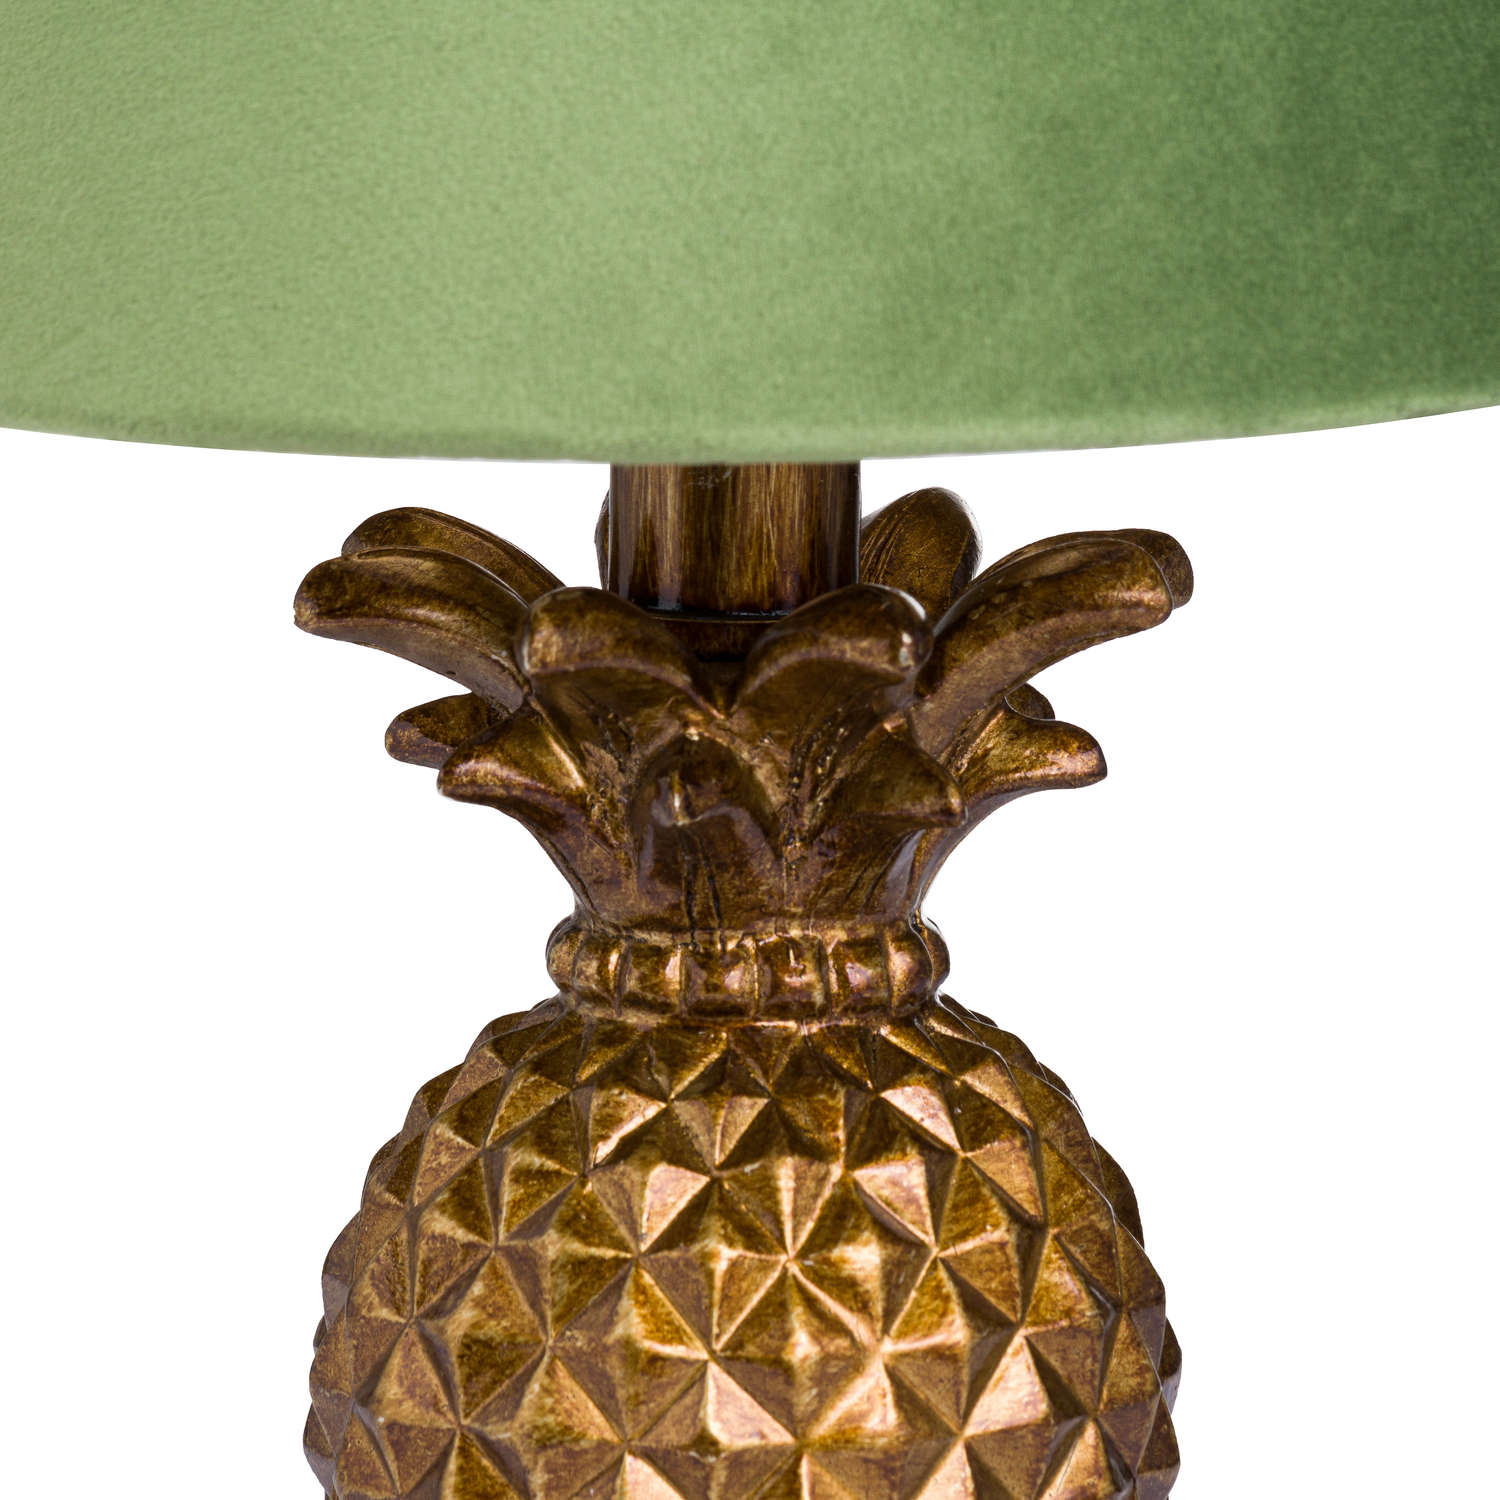 Antique Gold Pineapple Lamp With Artichoke Green VelvetShade - Image 2